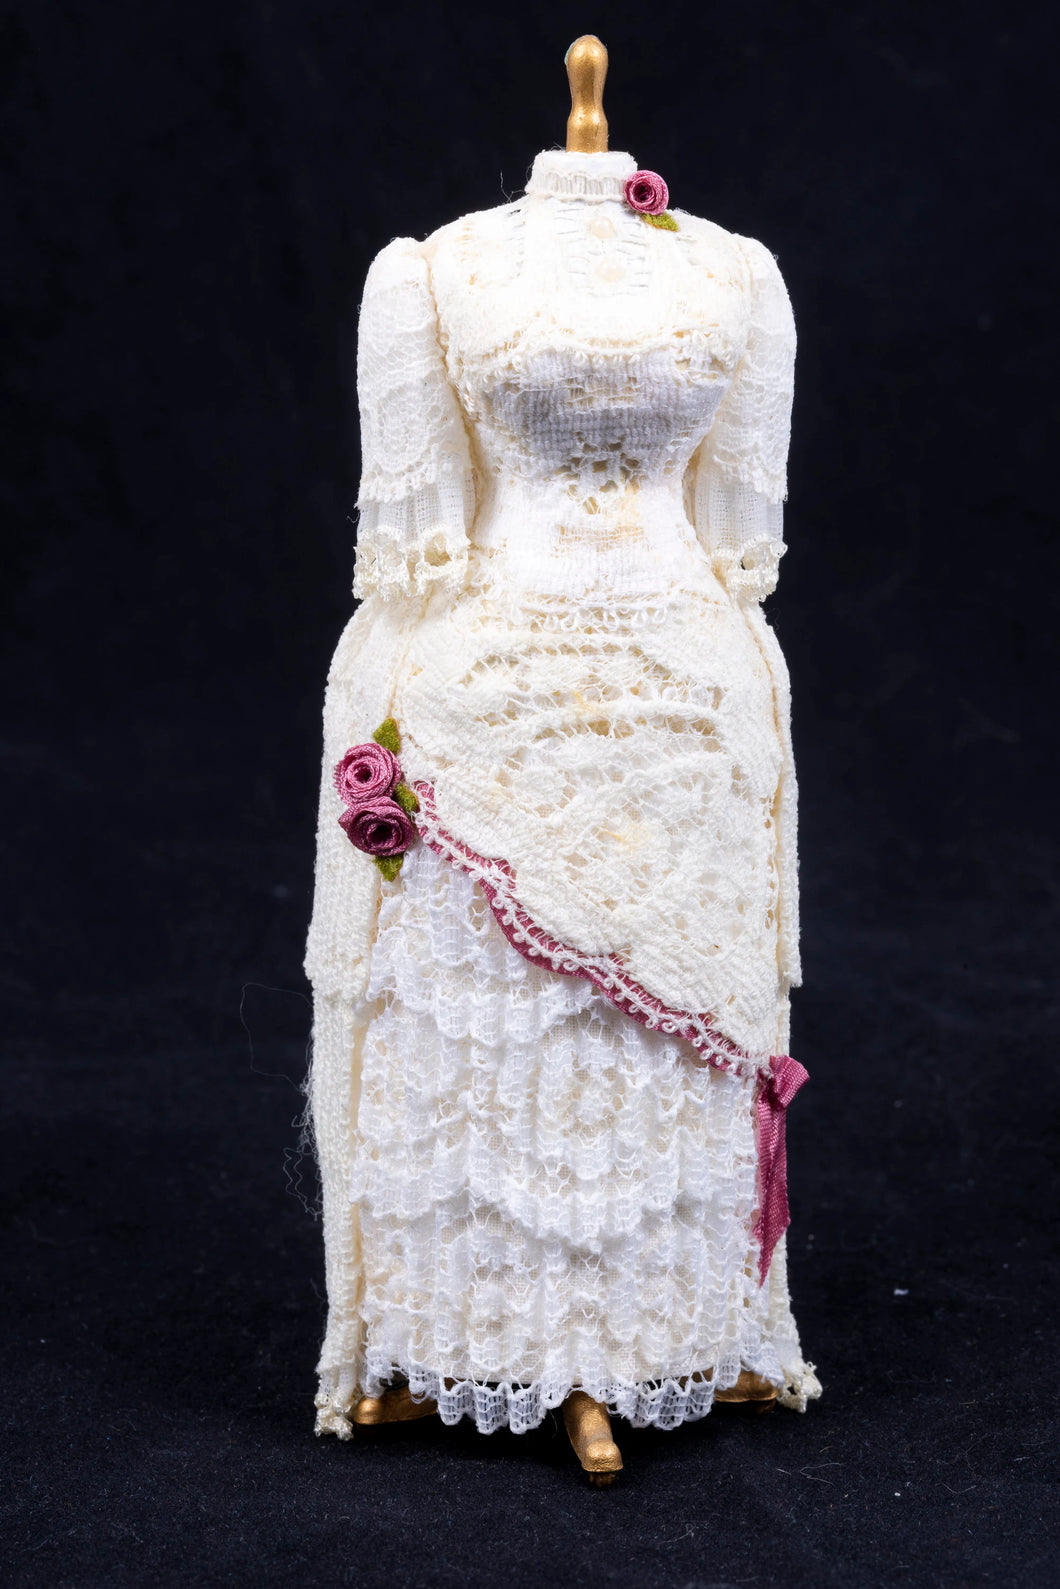 Lace Dress with Dark Pink Roses on Mannequin by Karen Benson